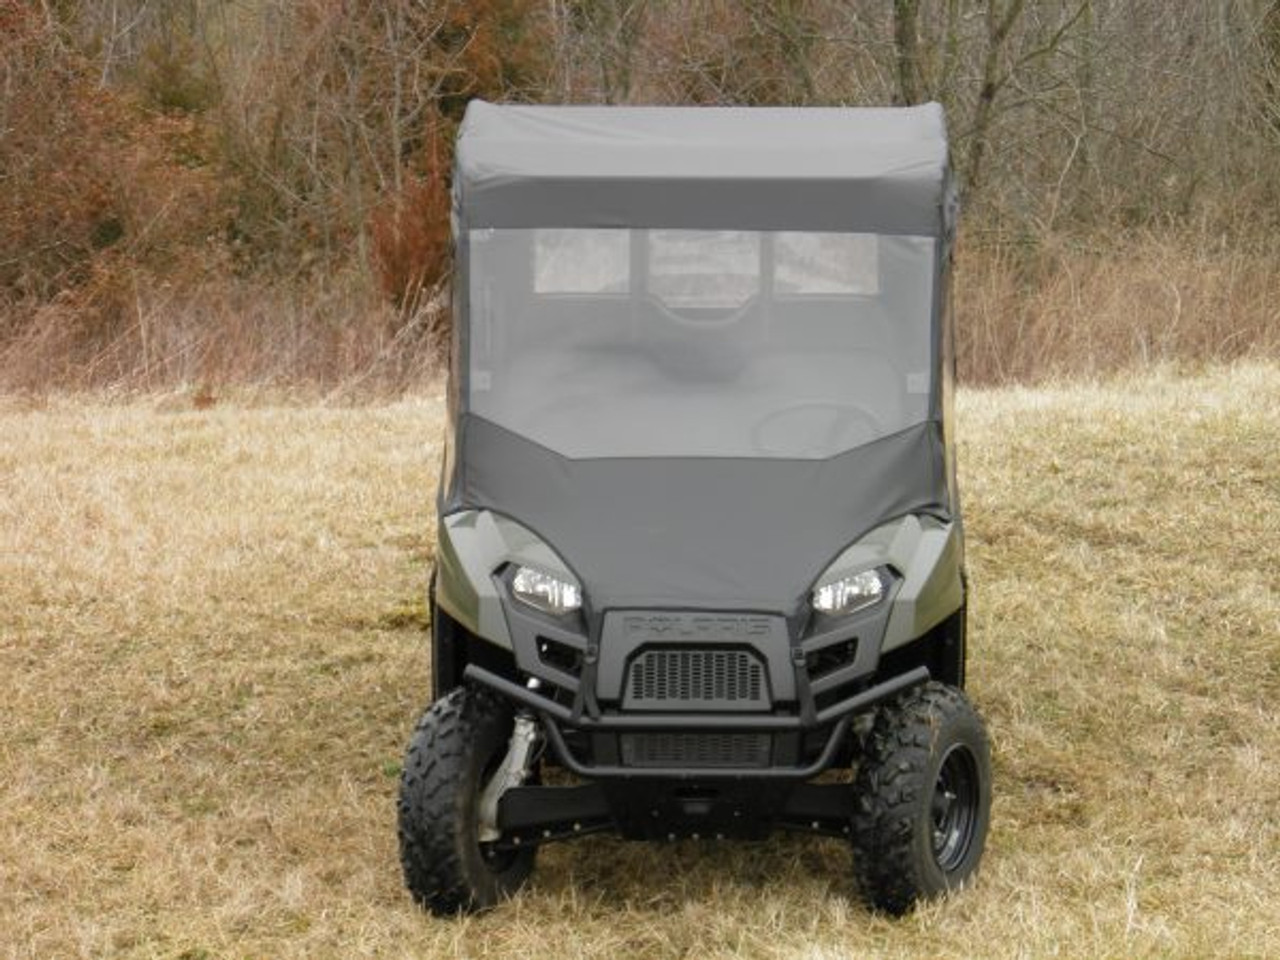 3 Star side x side Polaris Ranger Mid-Size Crew 500/570 full cab enclosure with vinyl windshield front view